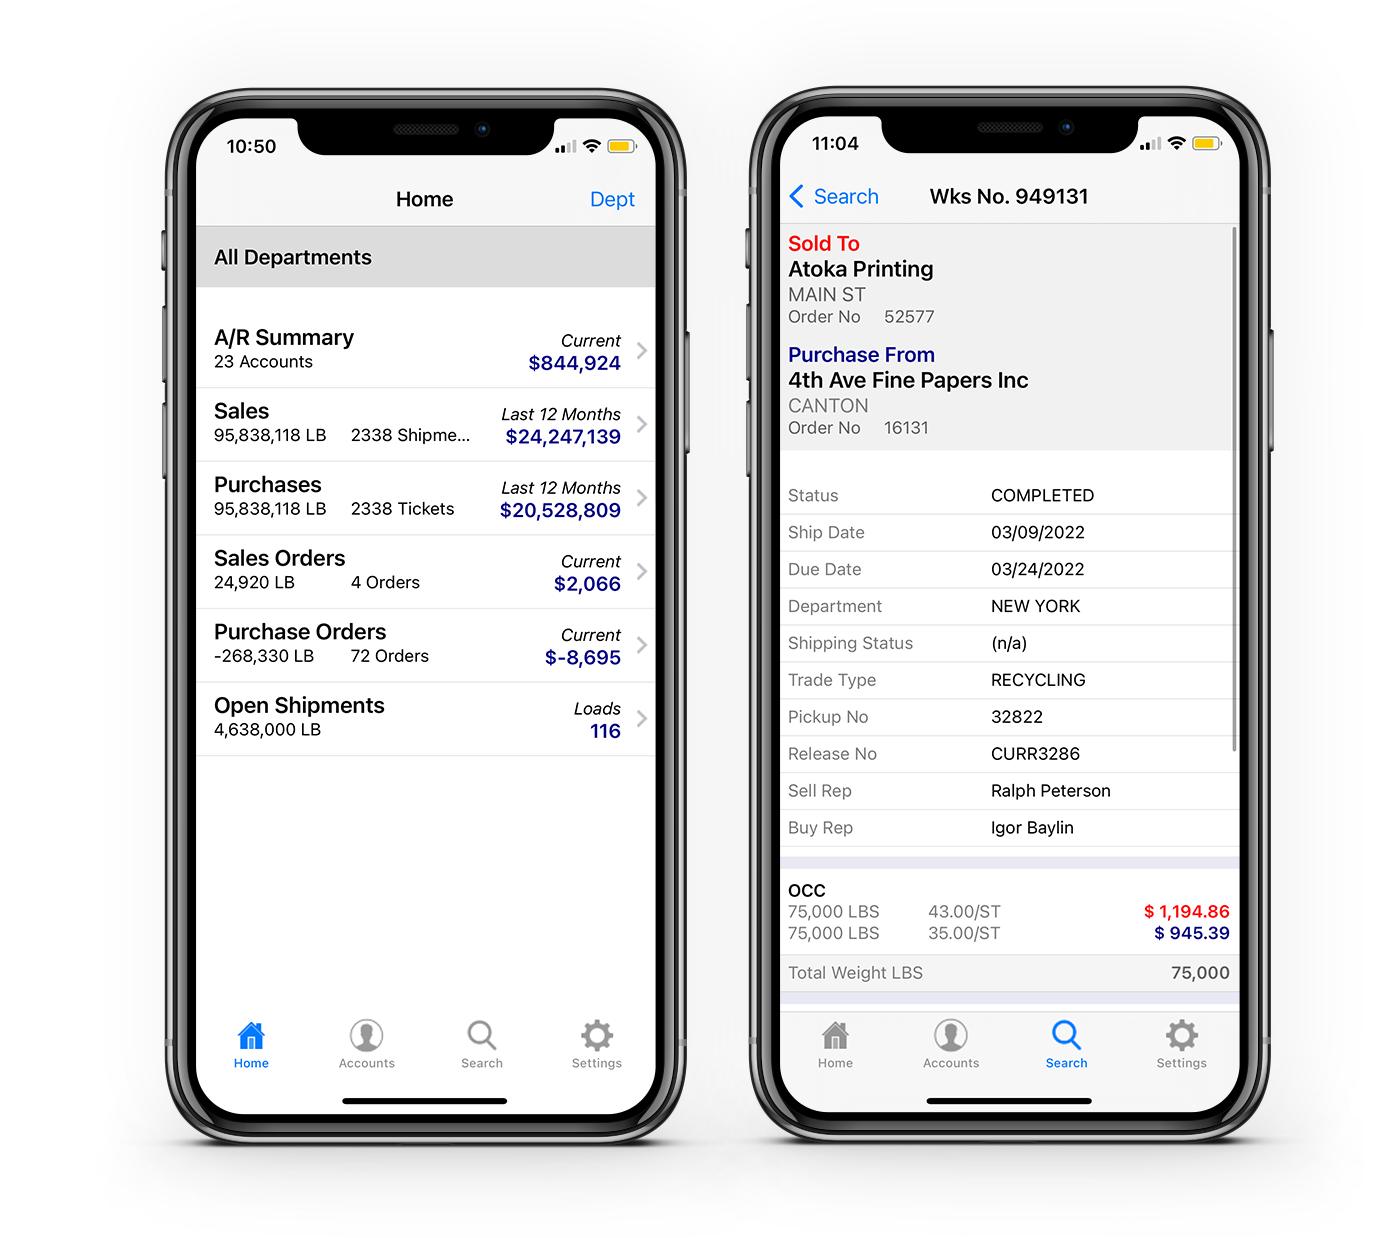 cieTrade's mobile reporting app, cieMobile, provides users with secure, real time connectivity to cieTrade account information and reports while on the go.